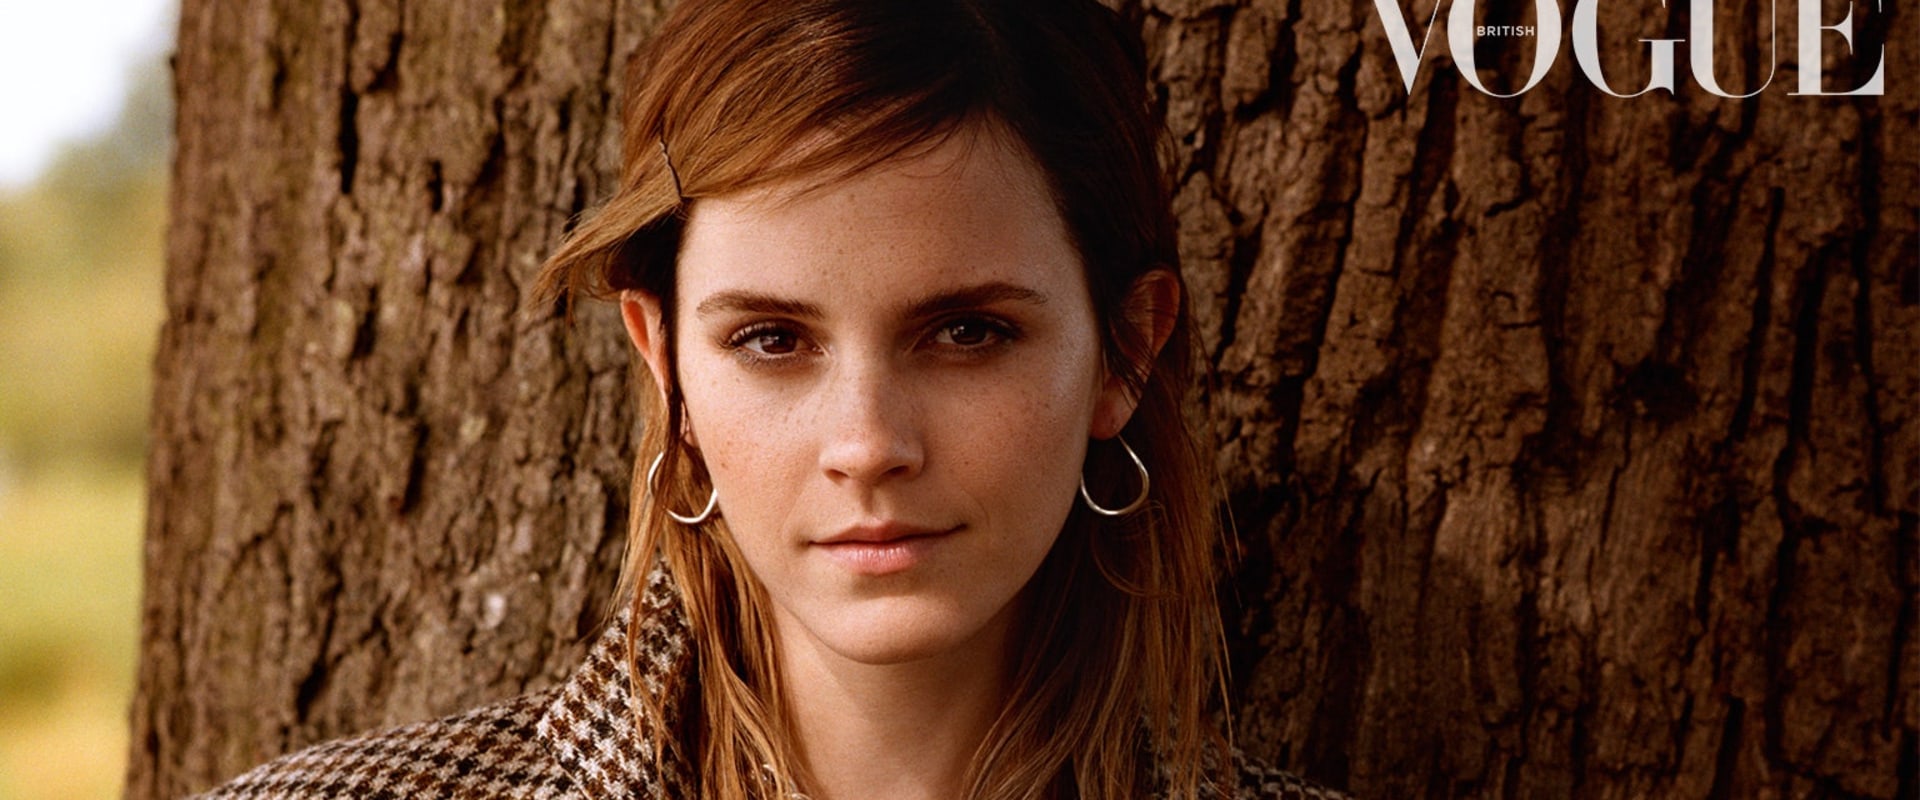 Emma Watson's Story of Success and Activism